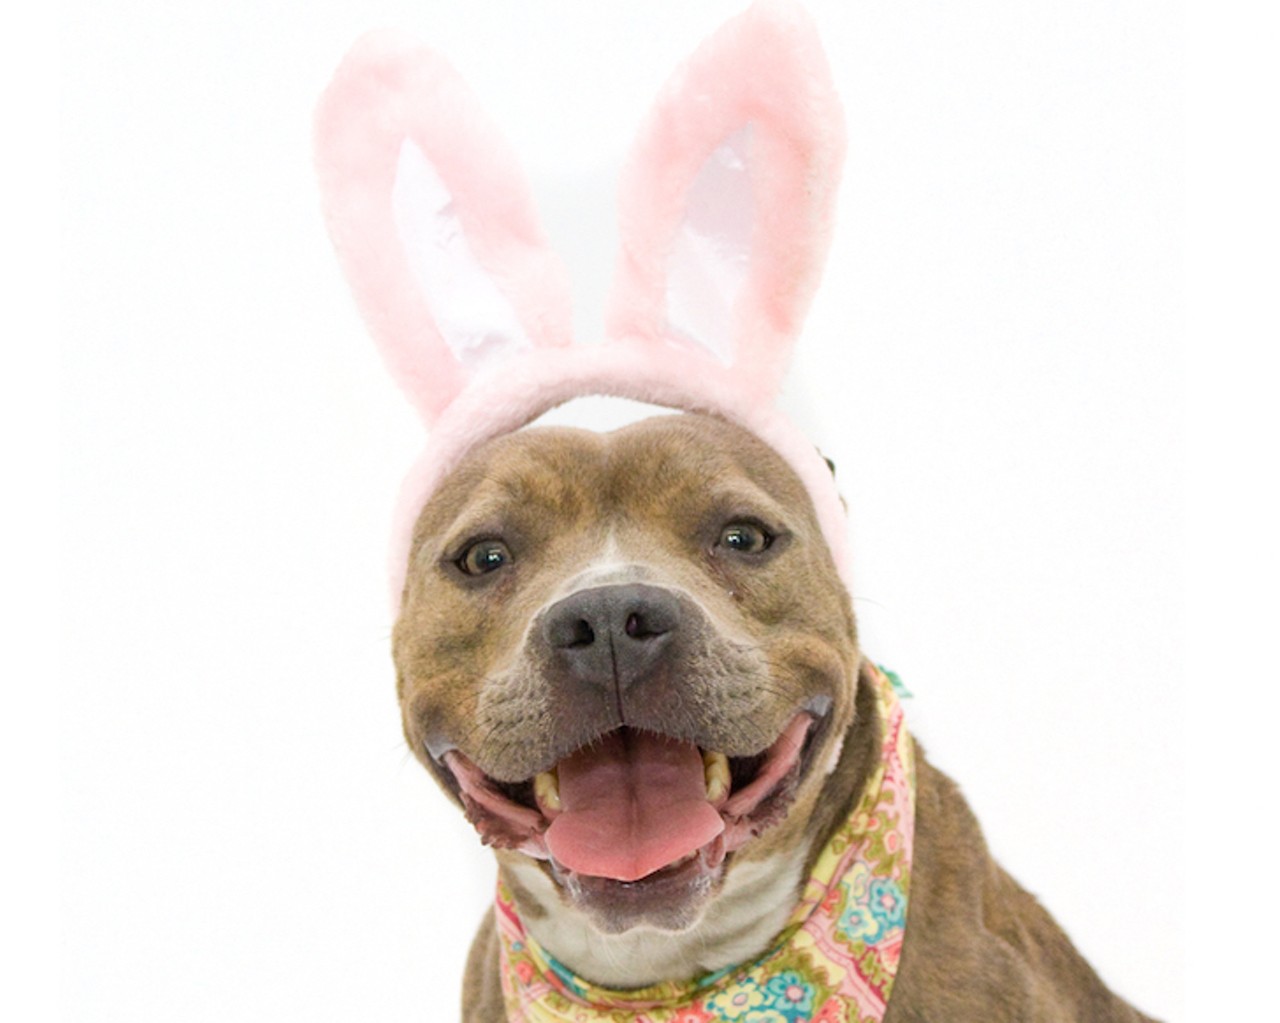 19 adoptable dogs that are cuter than the Easter bunny